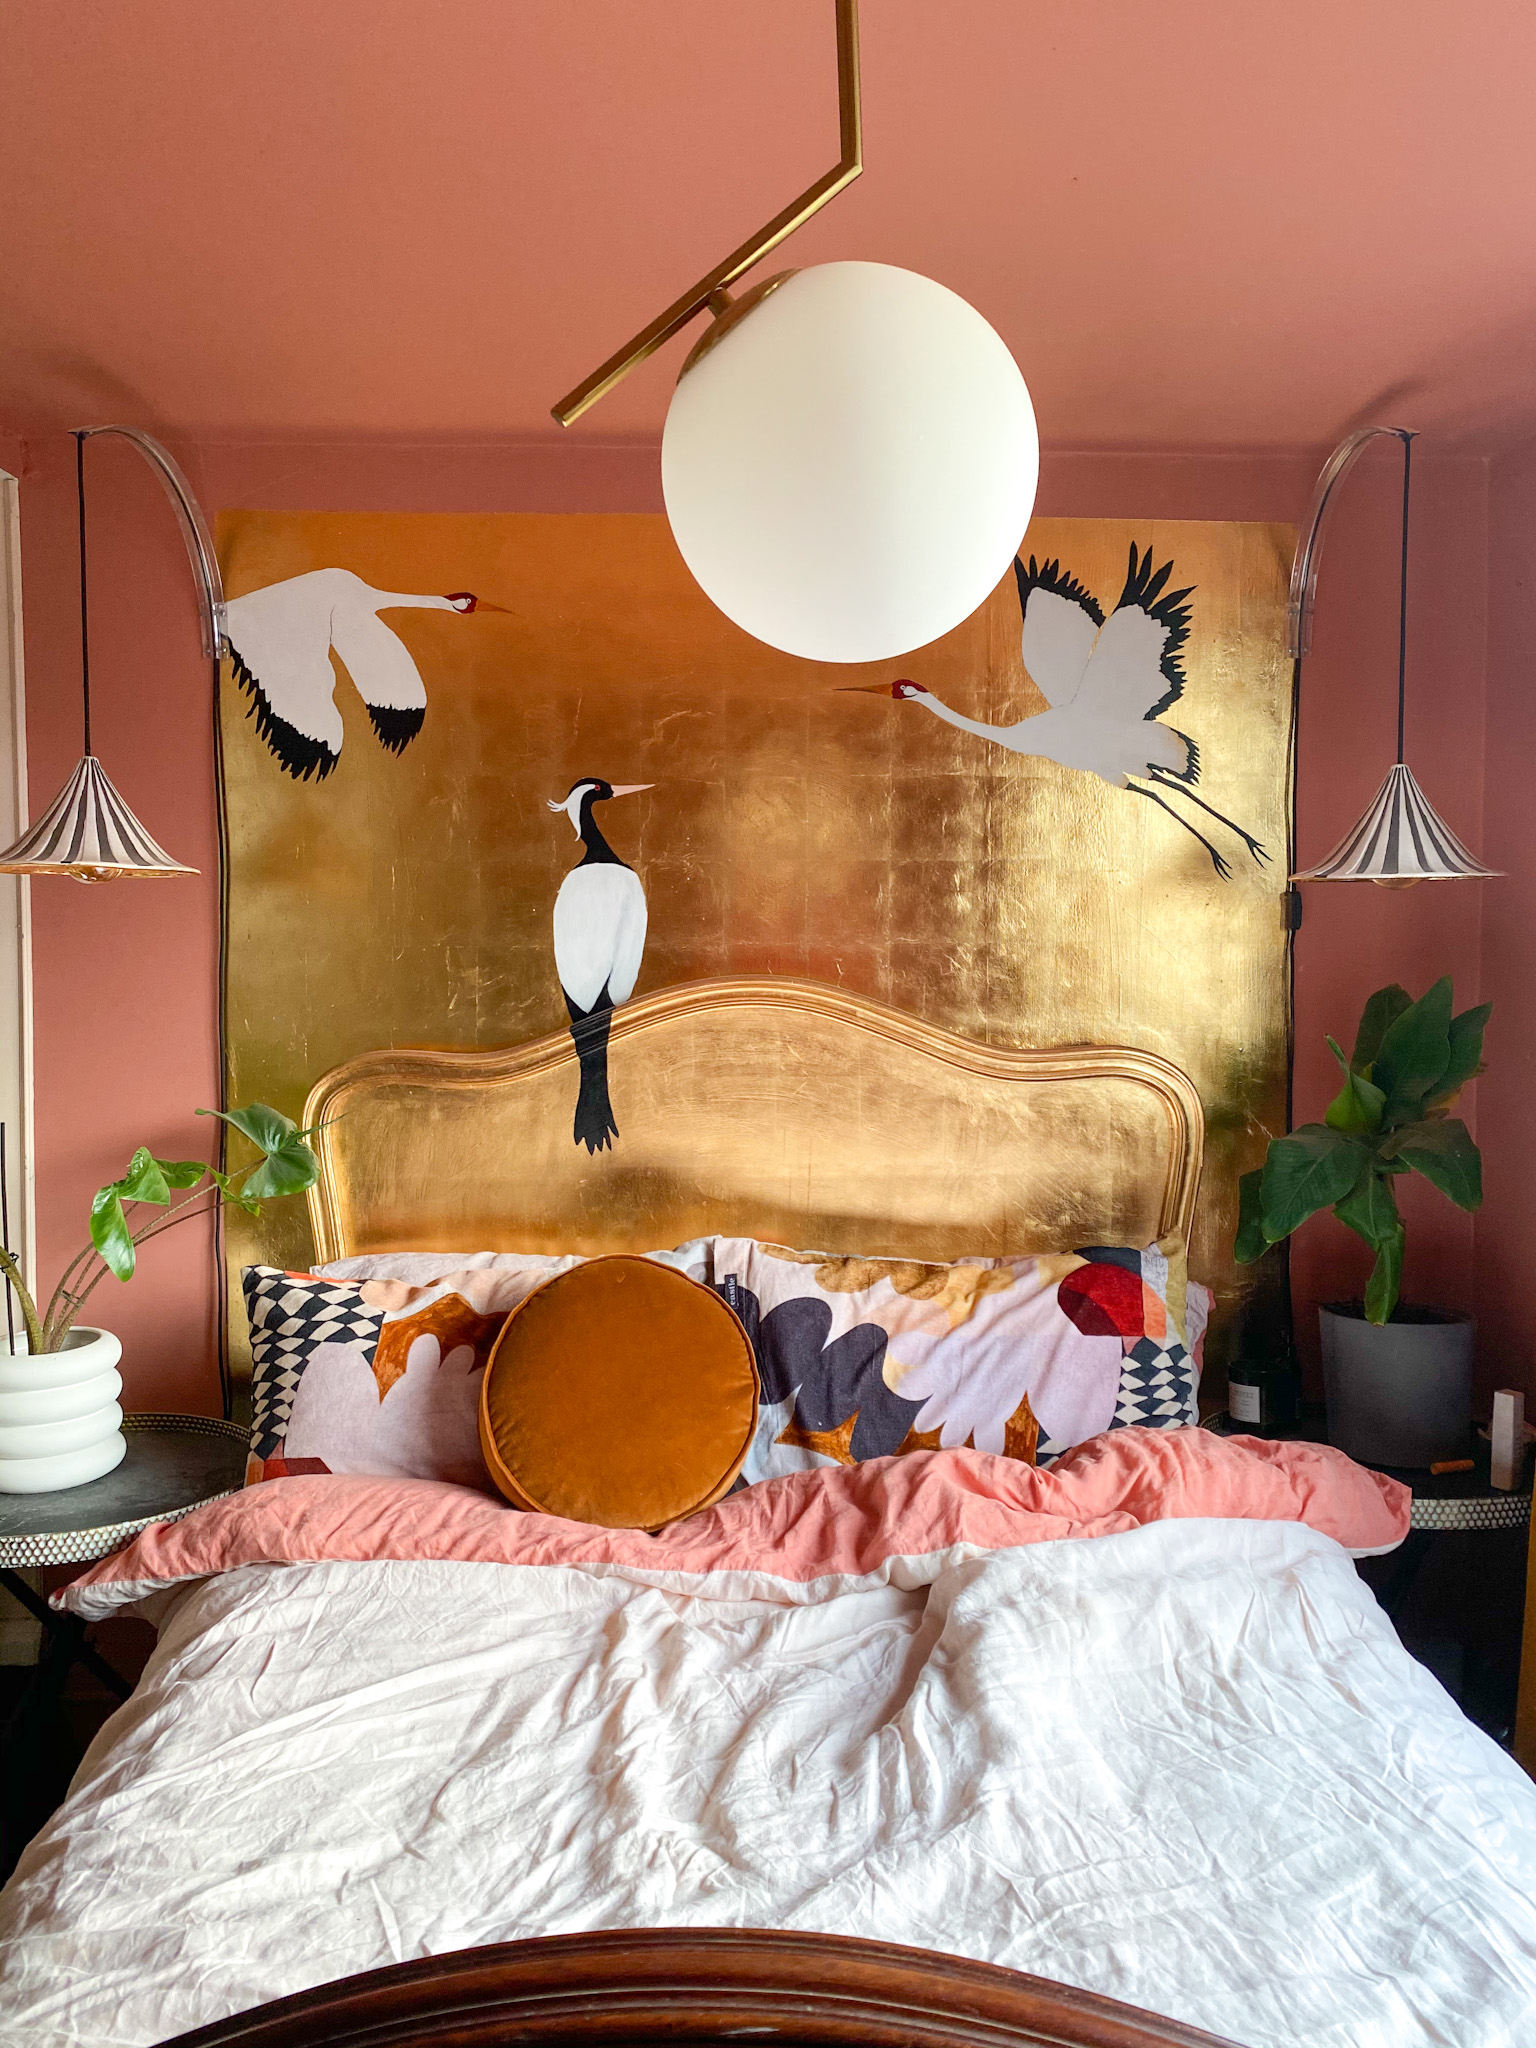 Gold leaf headboard mural with cranes